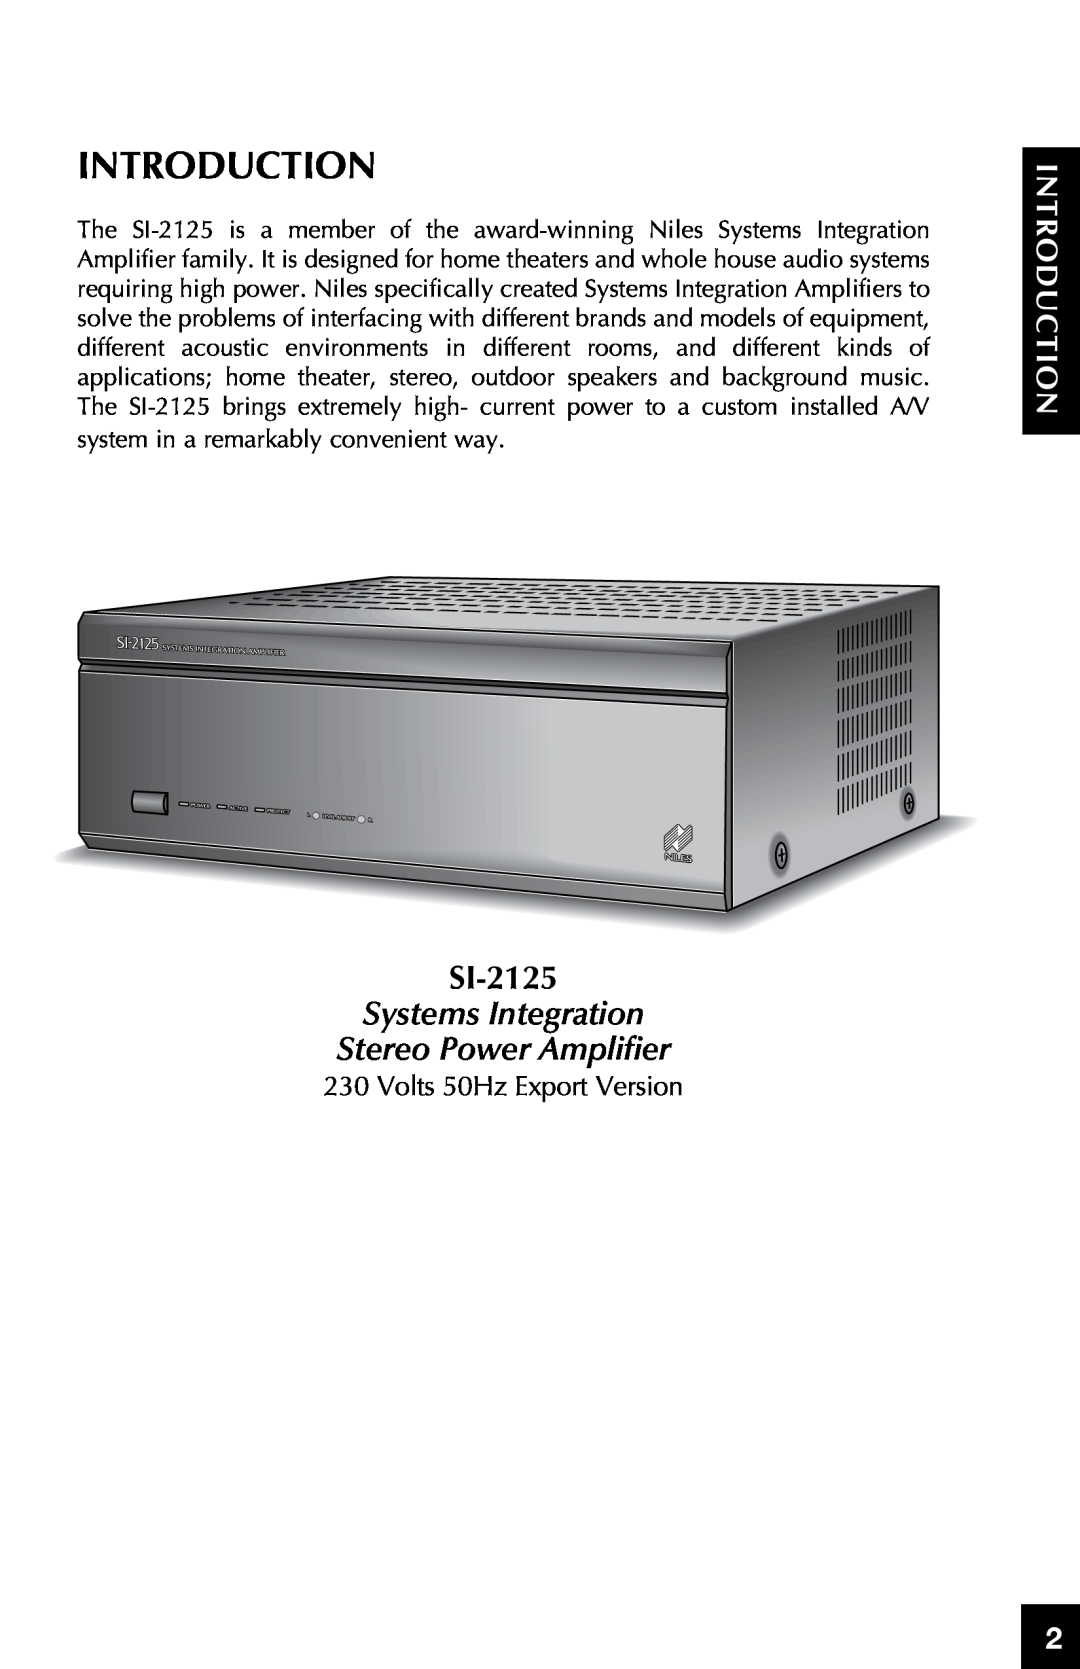 Niles Audio SI-2125 Introduction, ductionIntro, Systems Integration Stereo Power Amplifier, Volts 50Hz Export Version 